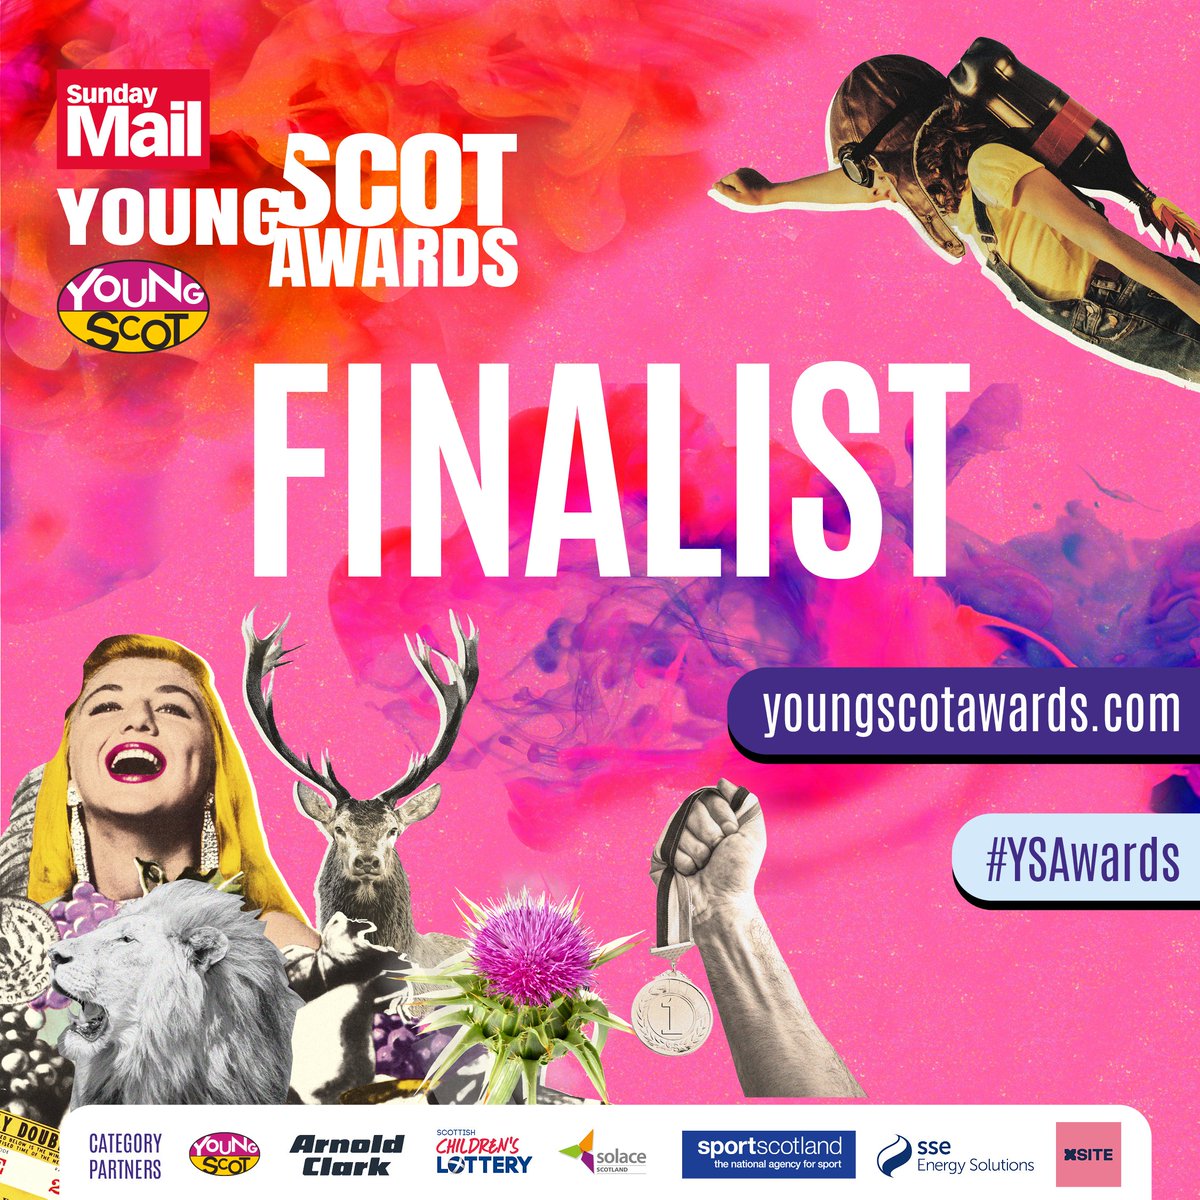 I'm a finalist!!!! Thank you so much @OliviaDrennanEd for nominating me for this ☺️🥳🥳🥳

#YSAwards @YoungScot @RosshallAcademy